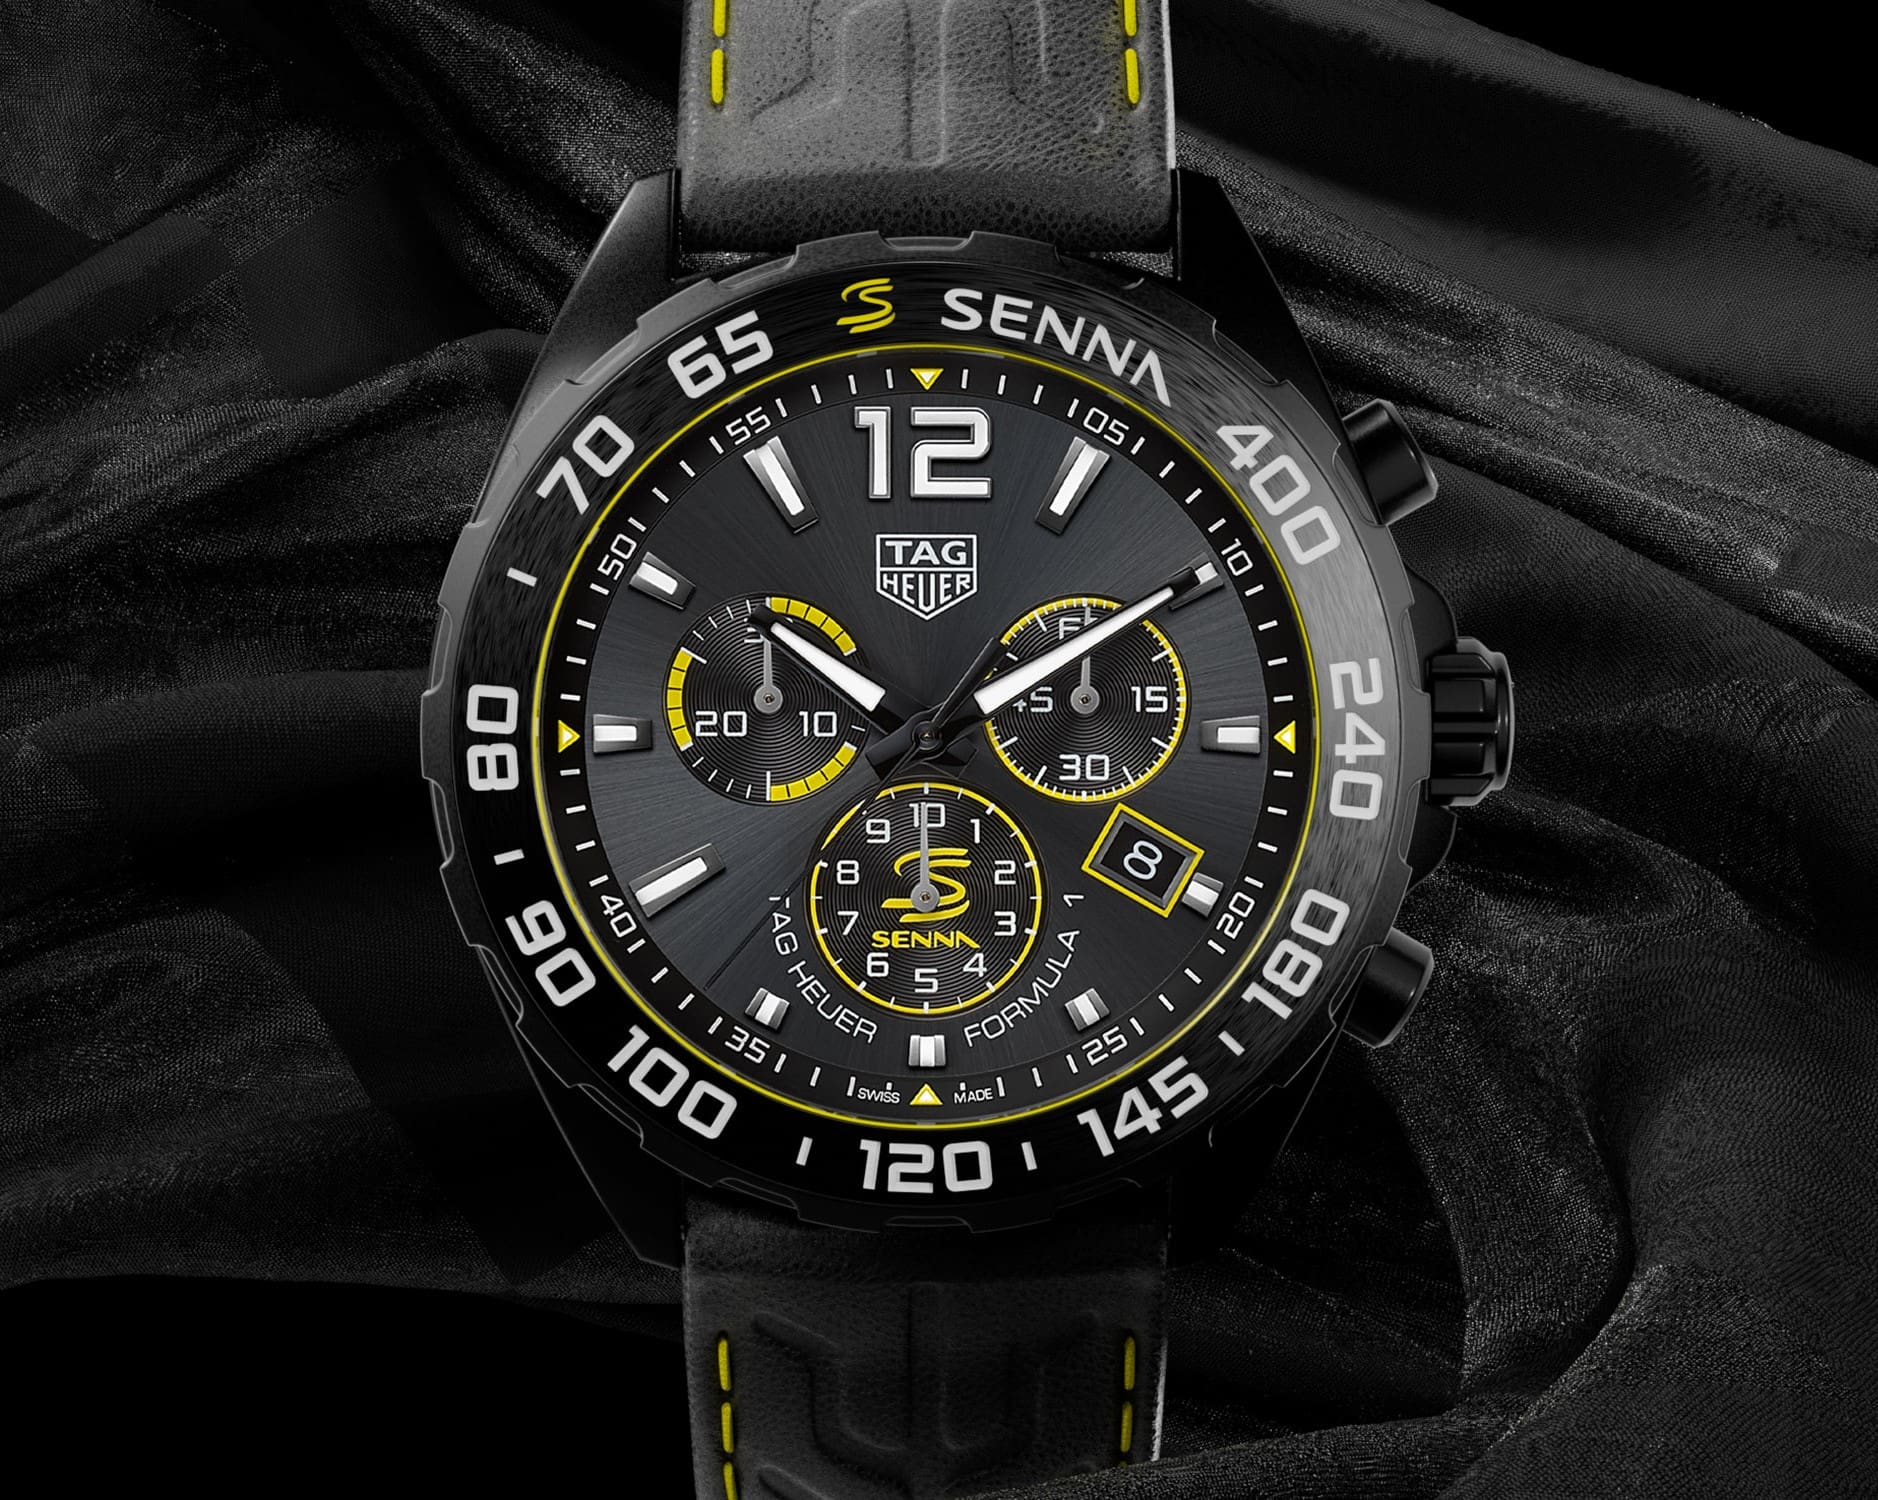 INTRODUCING: The TAG Heuer Formula 1 Senna Special Edition